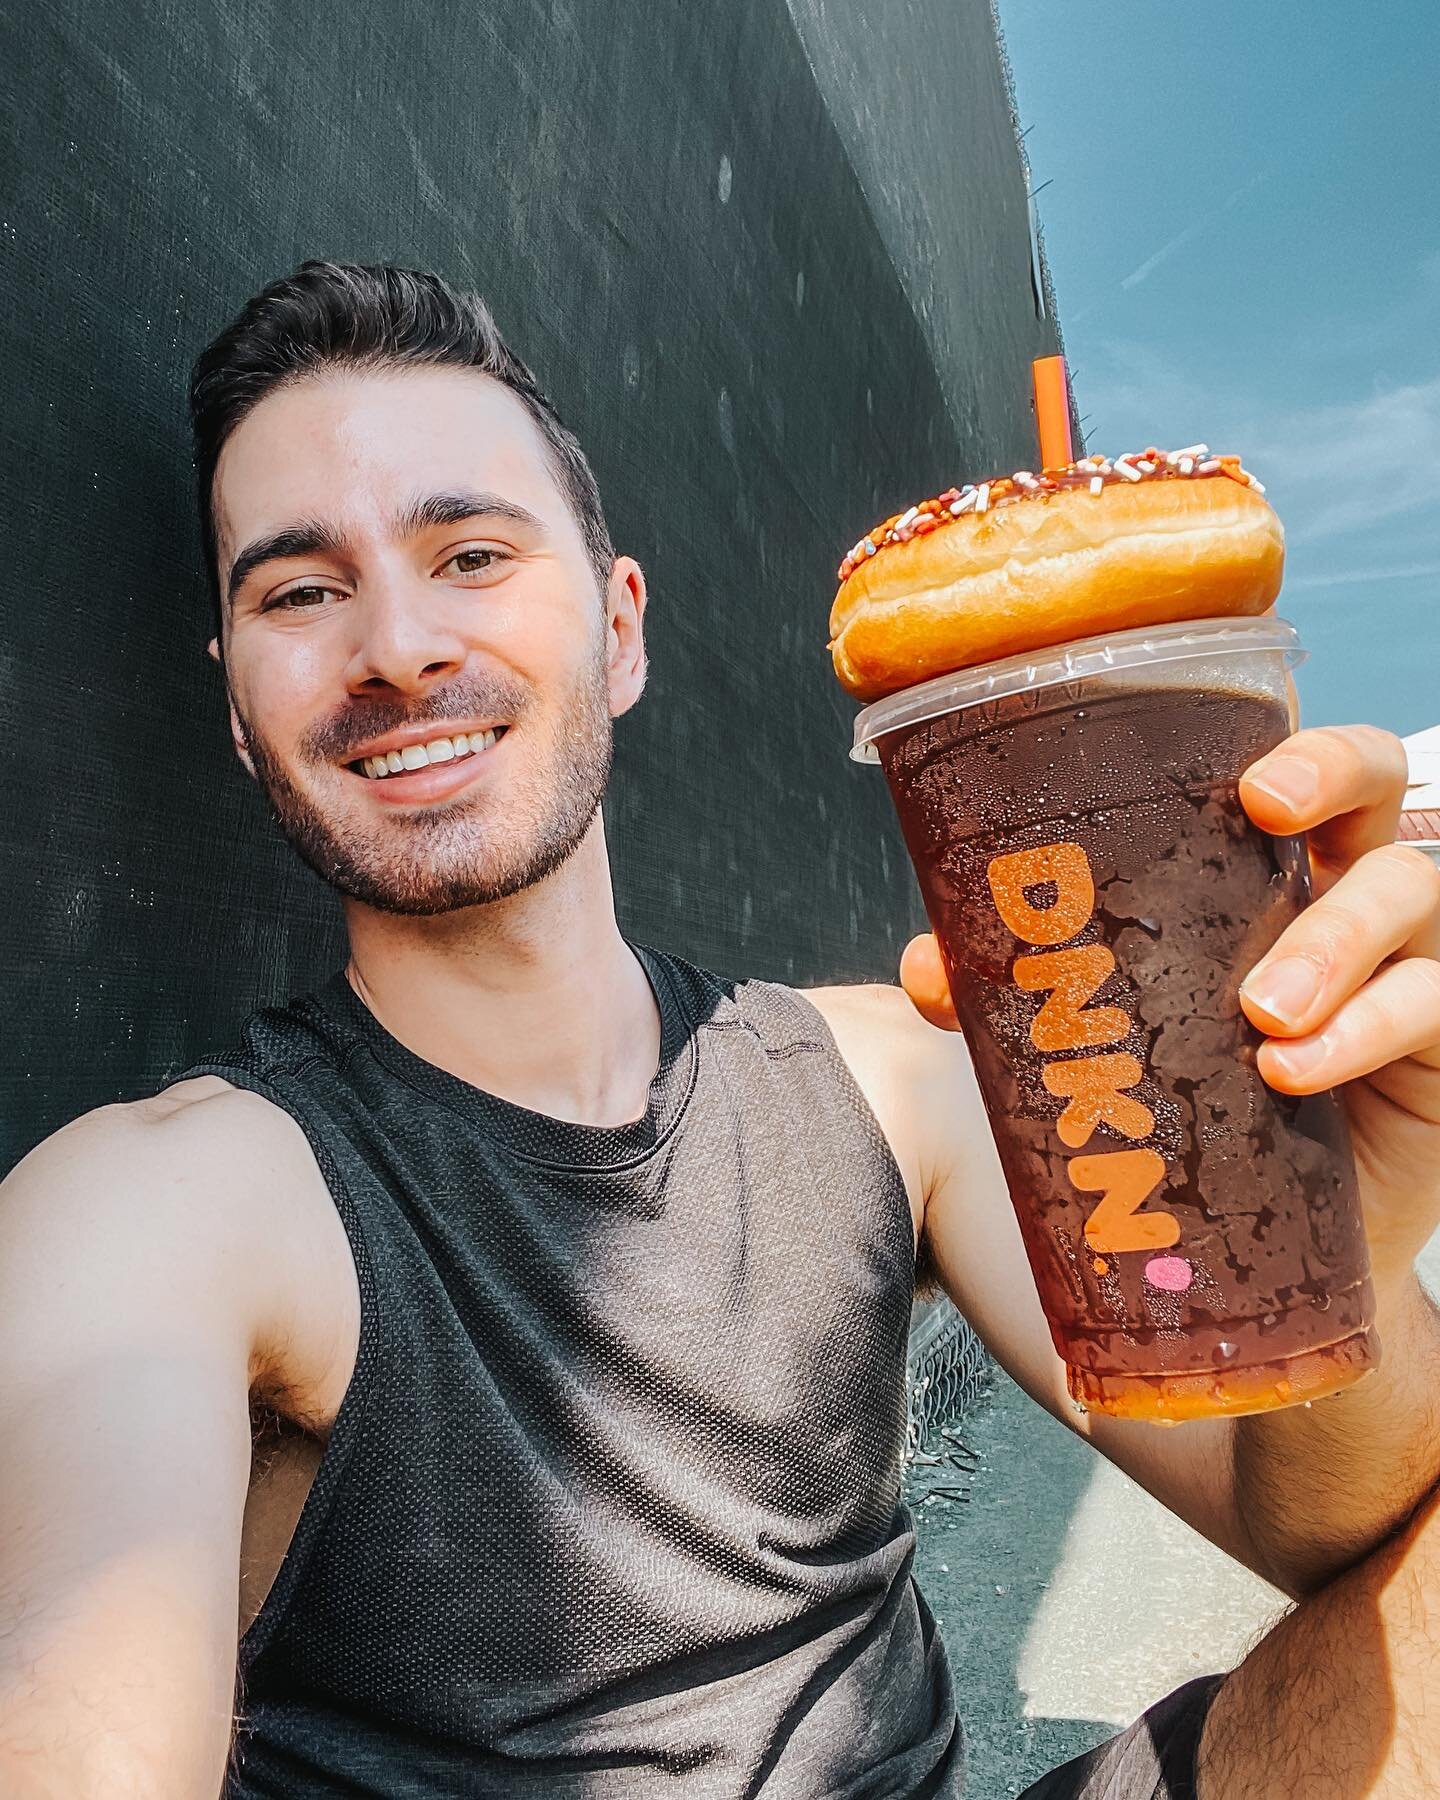 It&rsquo;s @dunkin #IcedCoffeeDay 🙌🏼 to celebrate, I&rsquo;m cooling off&nbsp;with a Dunkin&rsquo; Iced Coffee and a 🍩 after sweating it out on the tennis court // today only (5/26), $1 from every coffee sold at your local&nbsp;D.C&nbsp;Dunkin&rsq